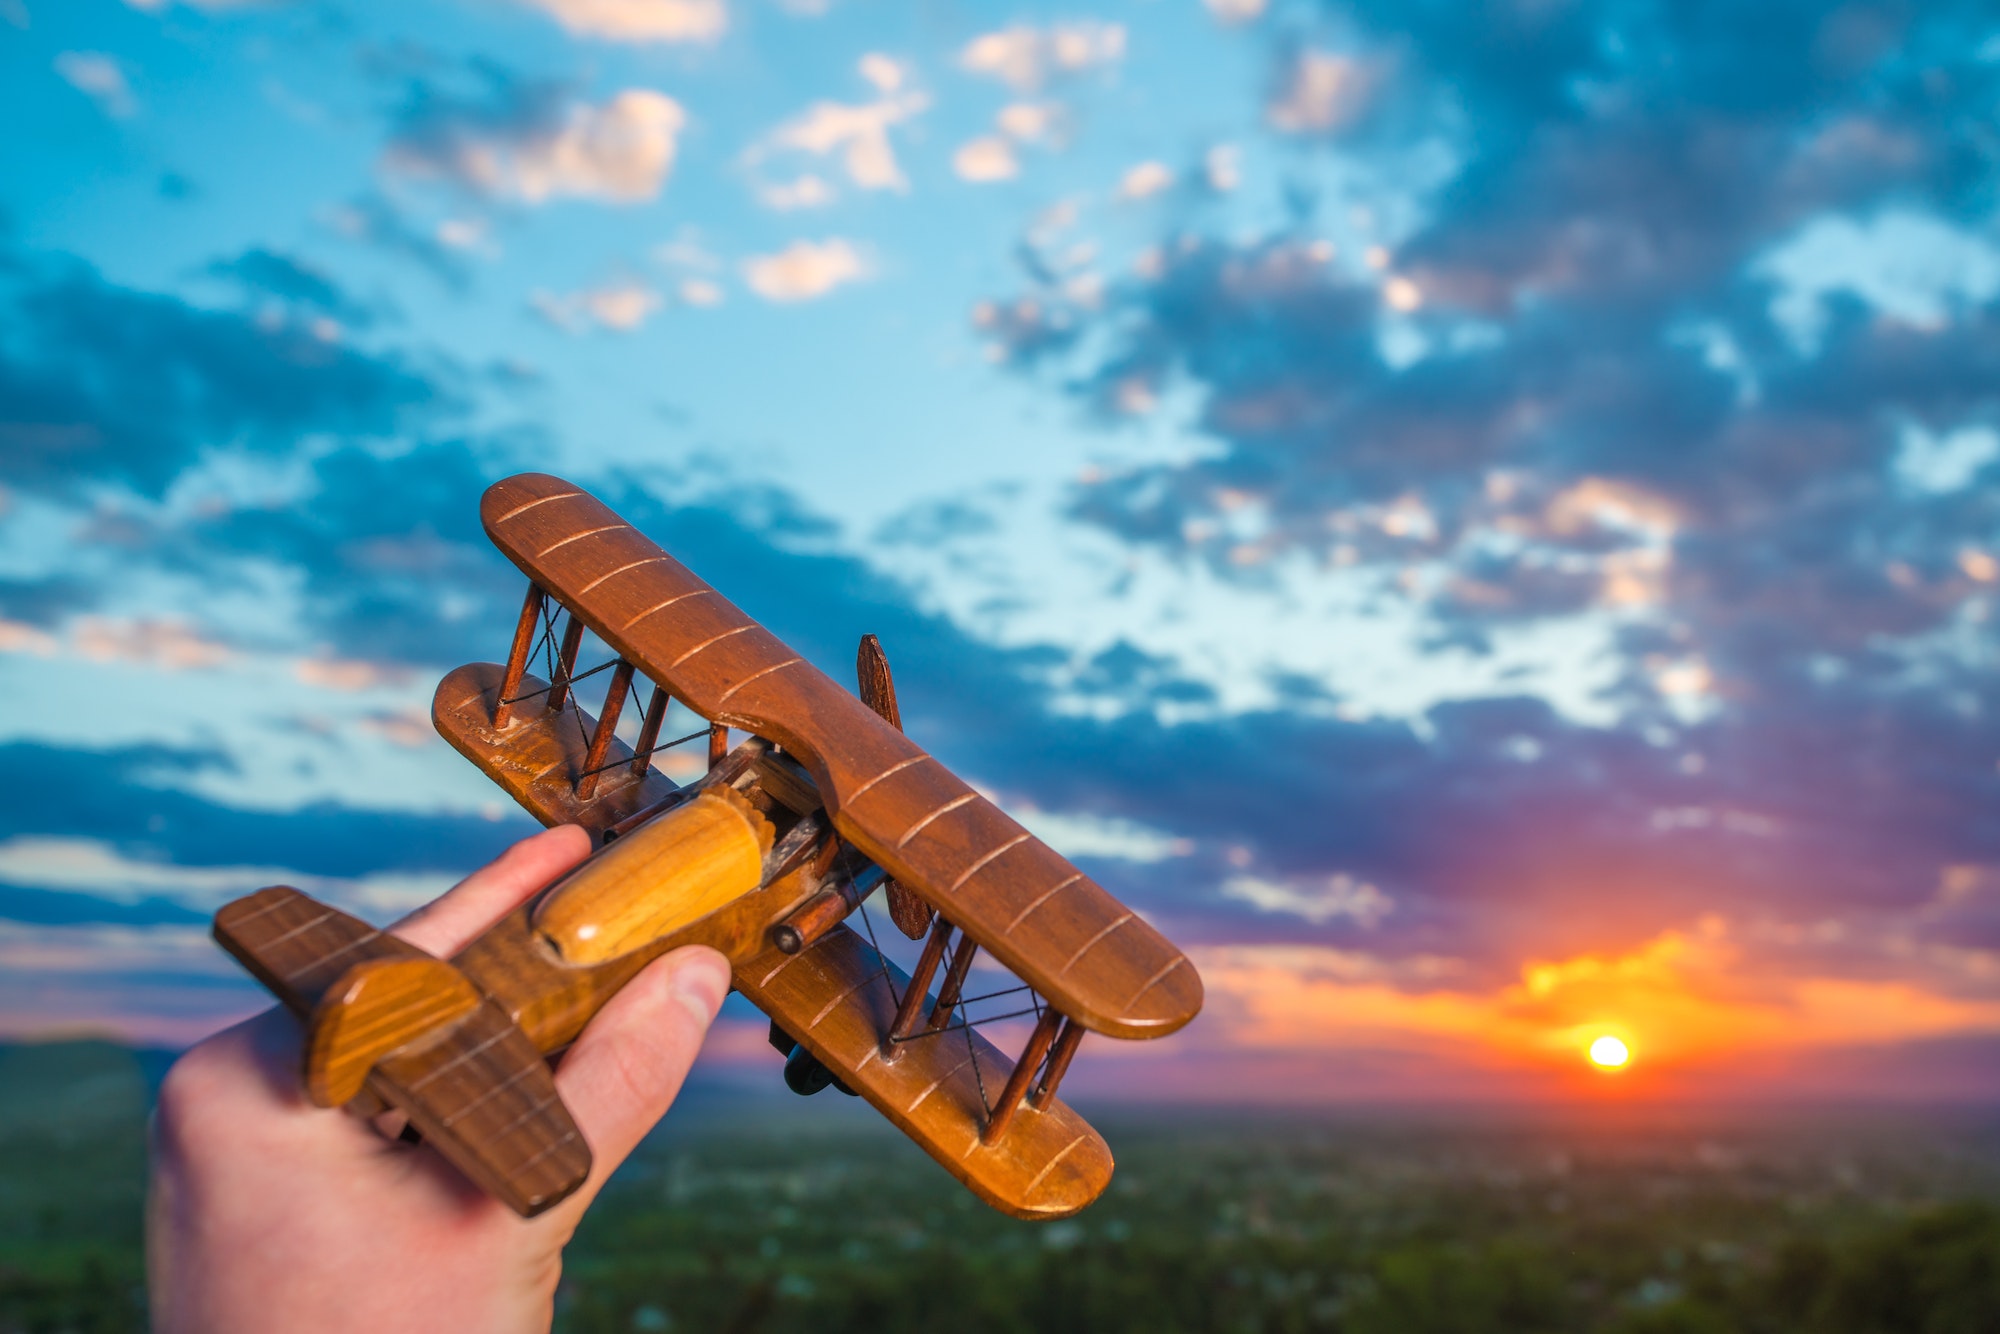 The hand with a toy plane against the background of a sunset